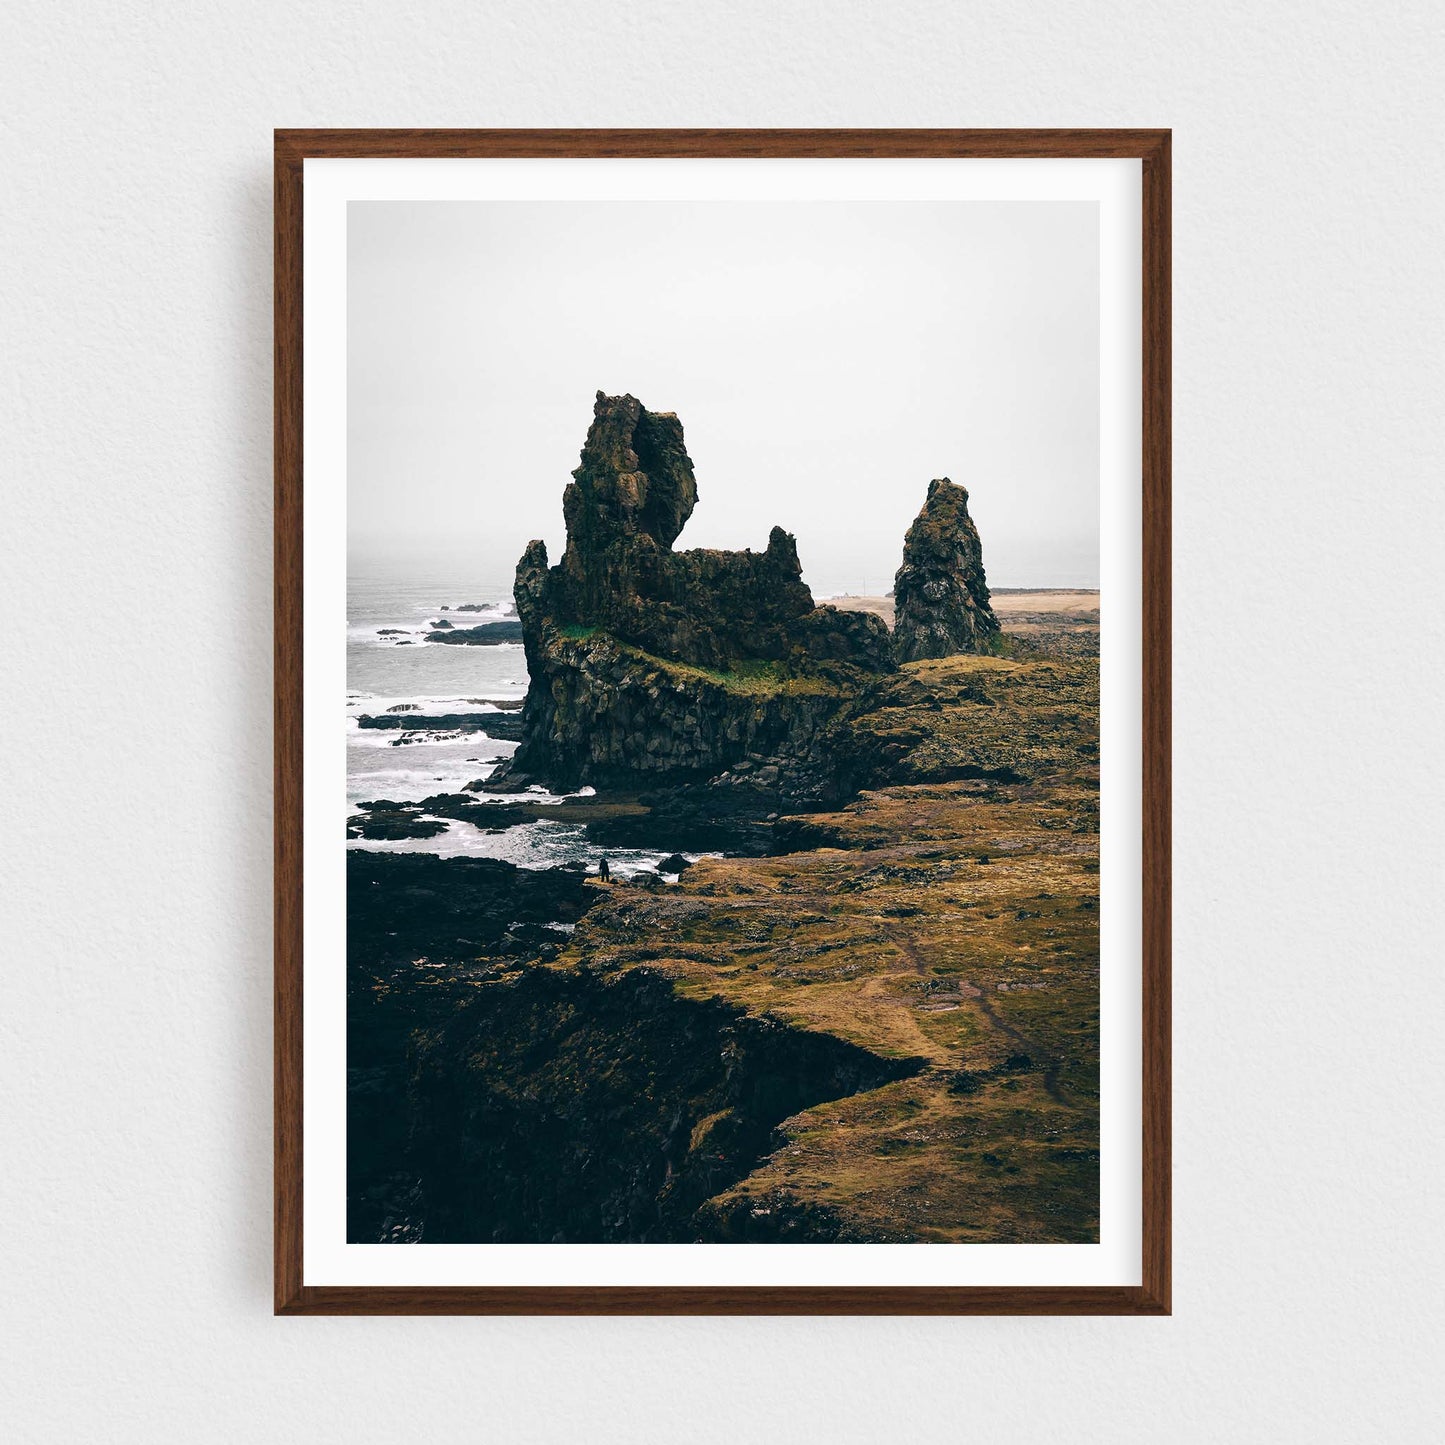 Iceland fine art photography print featuring Londrangar rock formations, in a walnut frame